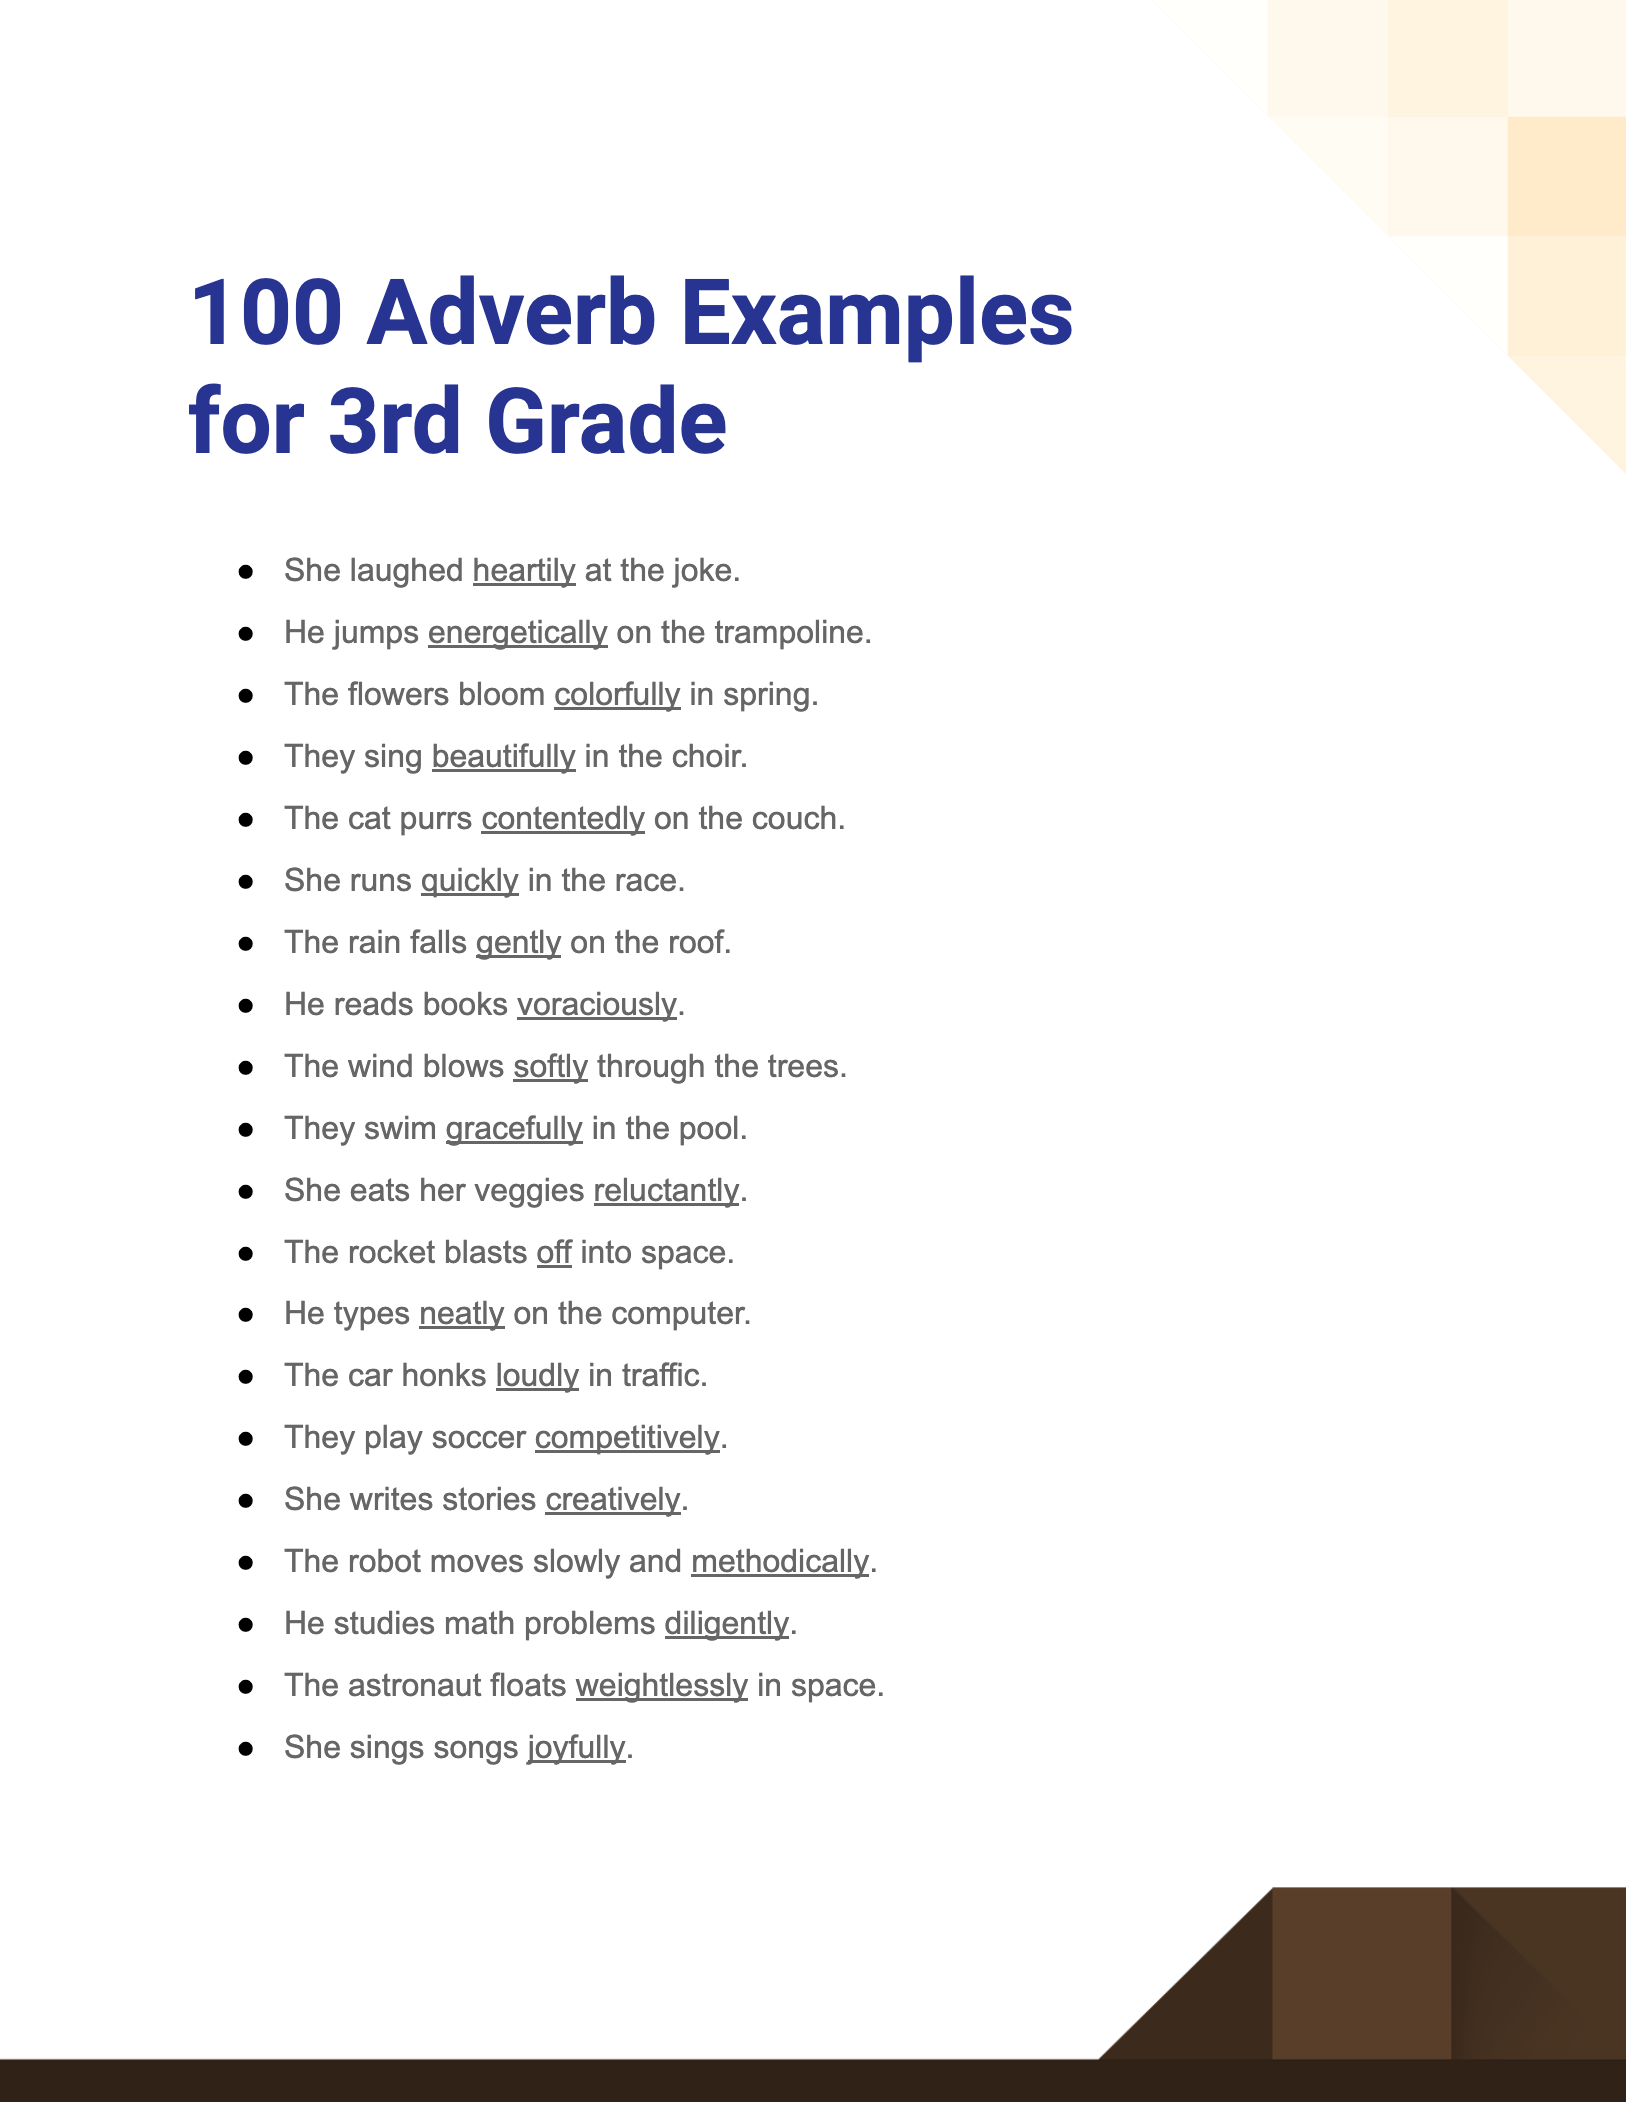 adverb examples for 3rd grade1